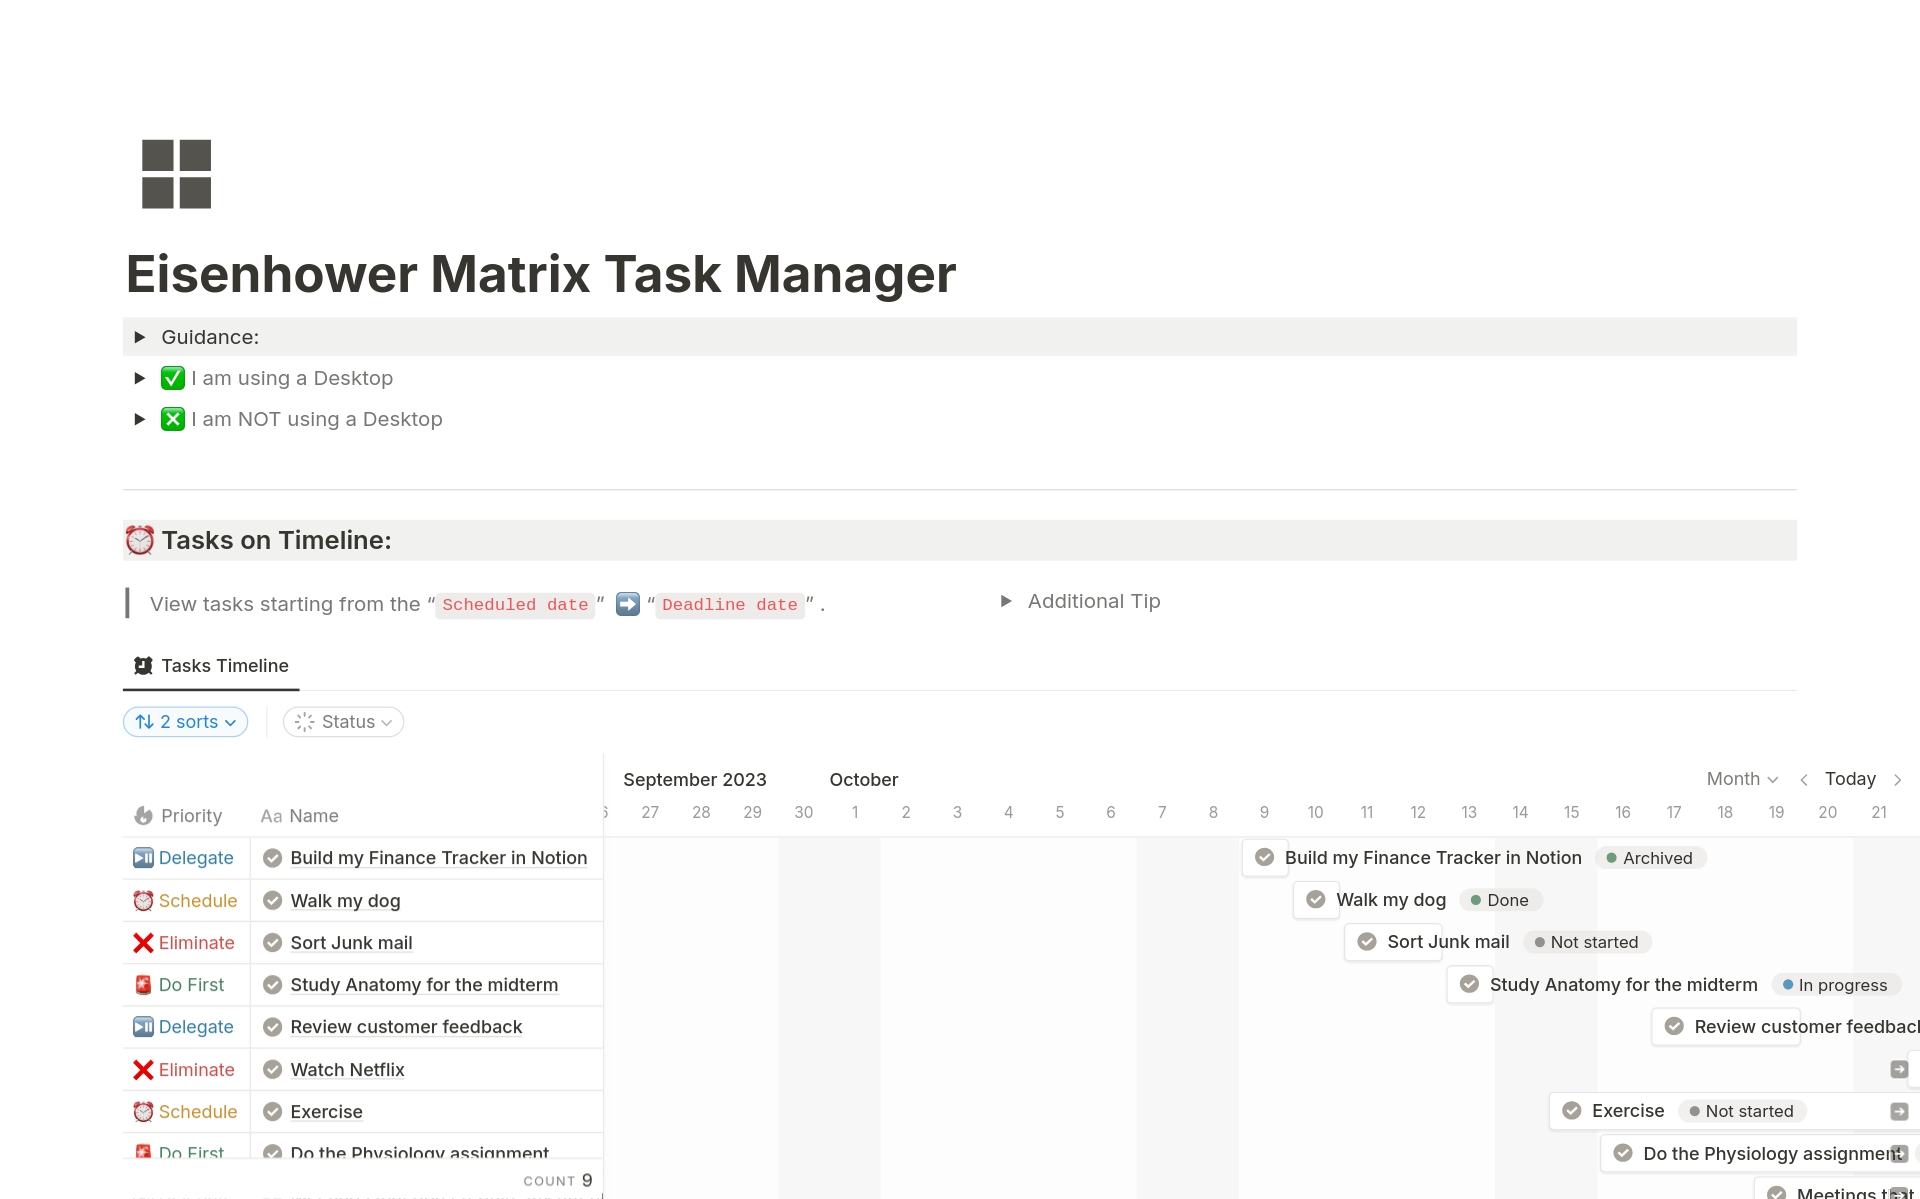 Revolutionize your productivity with the Eisenhower Matrix Task Manager, that simplifies task prioritization and organization for unparalleled efficiency. Inspired by the 34th president of the United States.